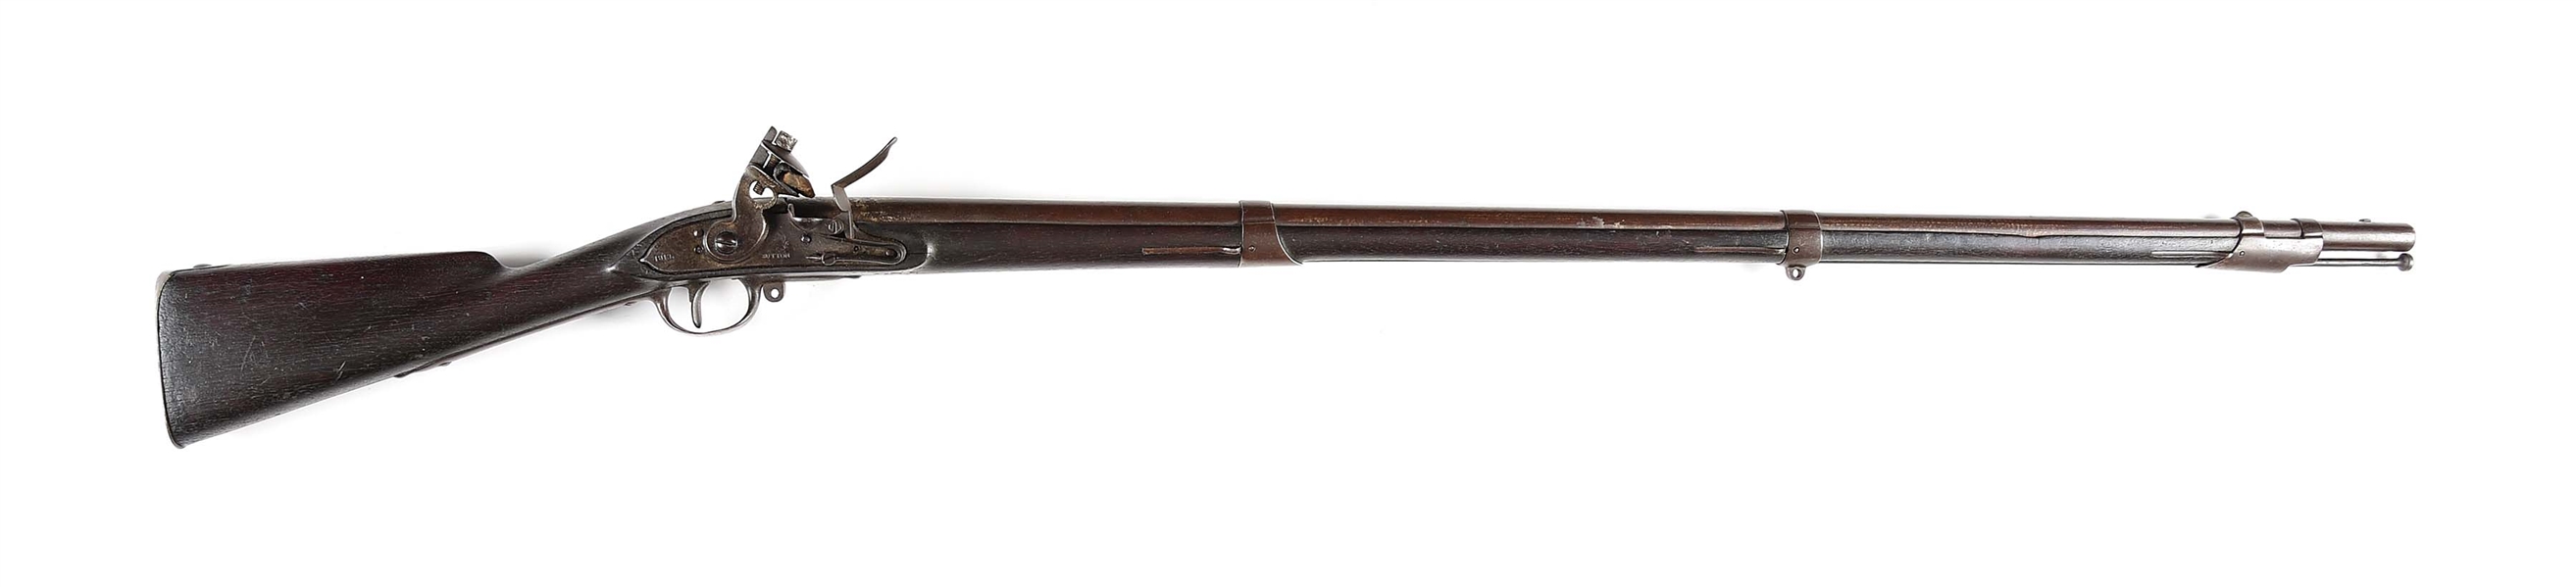 (A) WATERS & WHITMORE CONTRACT SUTTON MODEL 1808 .69 CALIBER FLINTLOCK MUSKET DATED 1813.